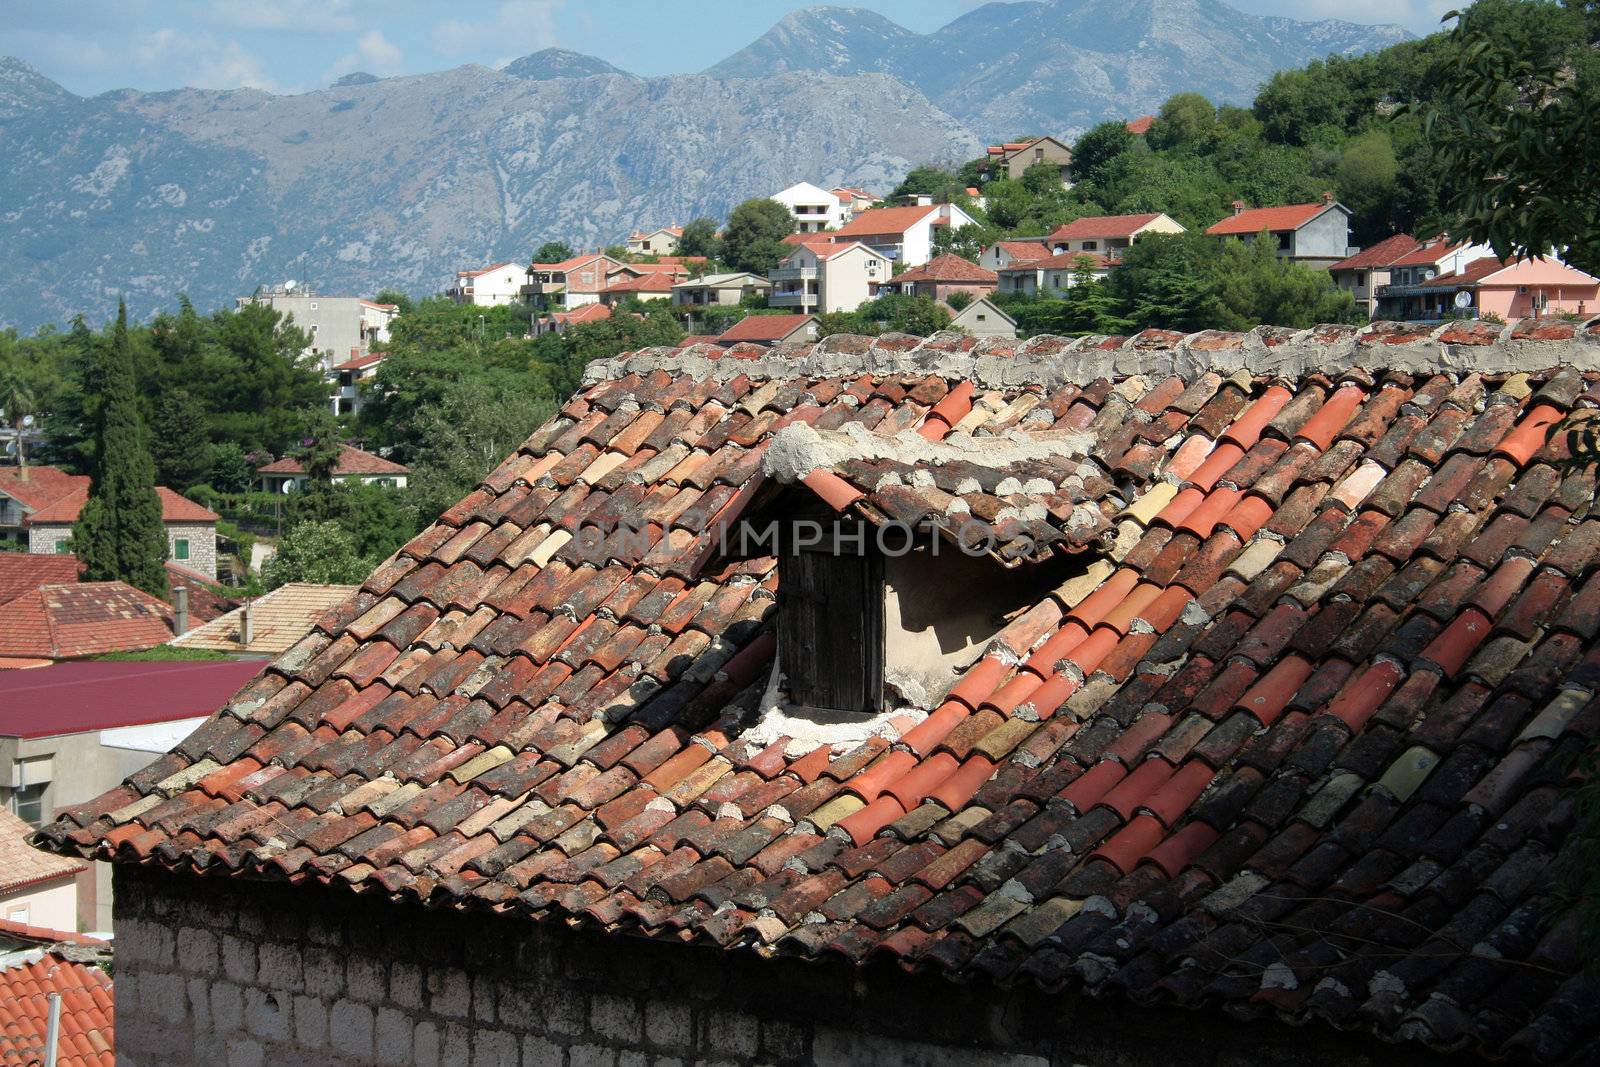 old rooftiles on the old house (Kotor - Montenegro)